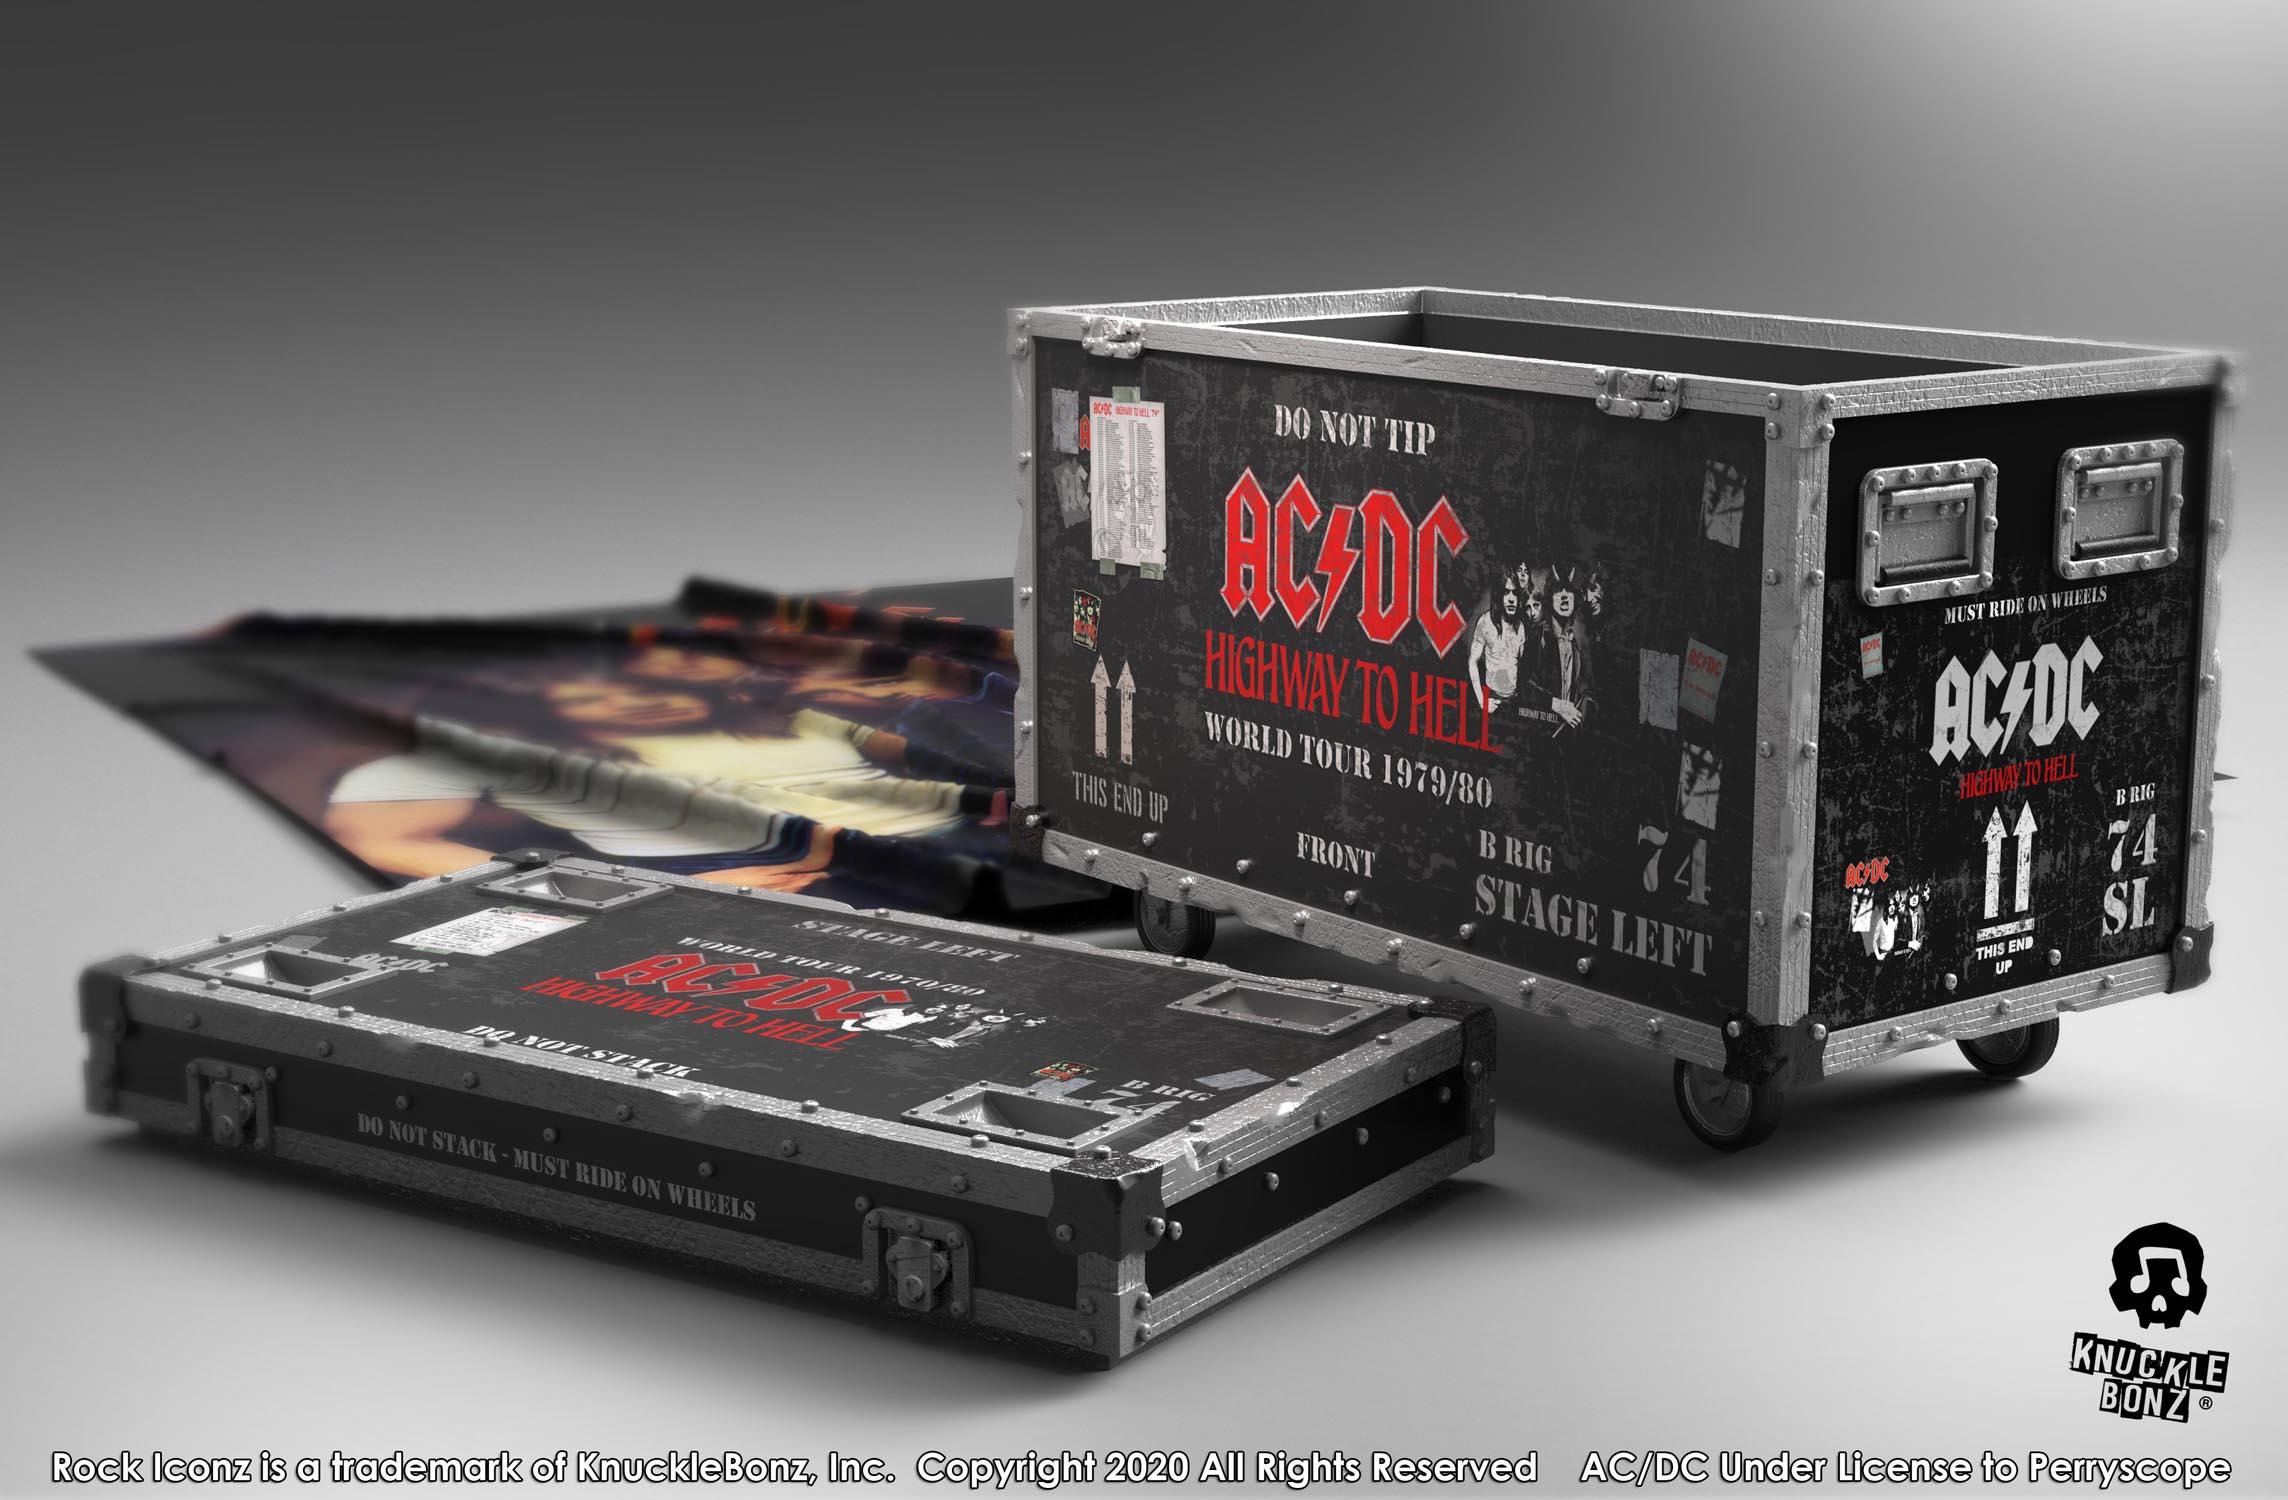 KNUACDCHHRC100 AC/DC - Highway To Hell Road Case & Stage Backdrop - KnuckleBonz - Titan Pop Culture